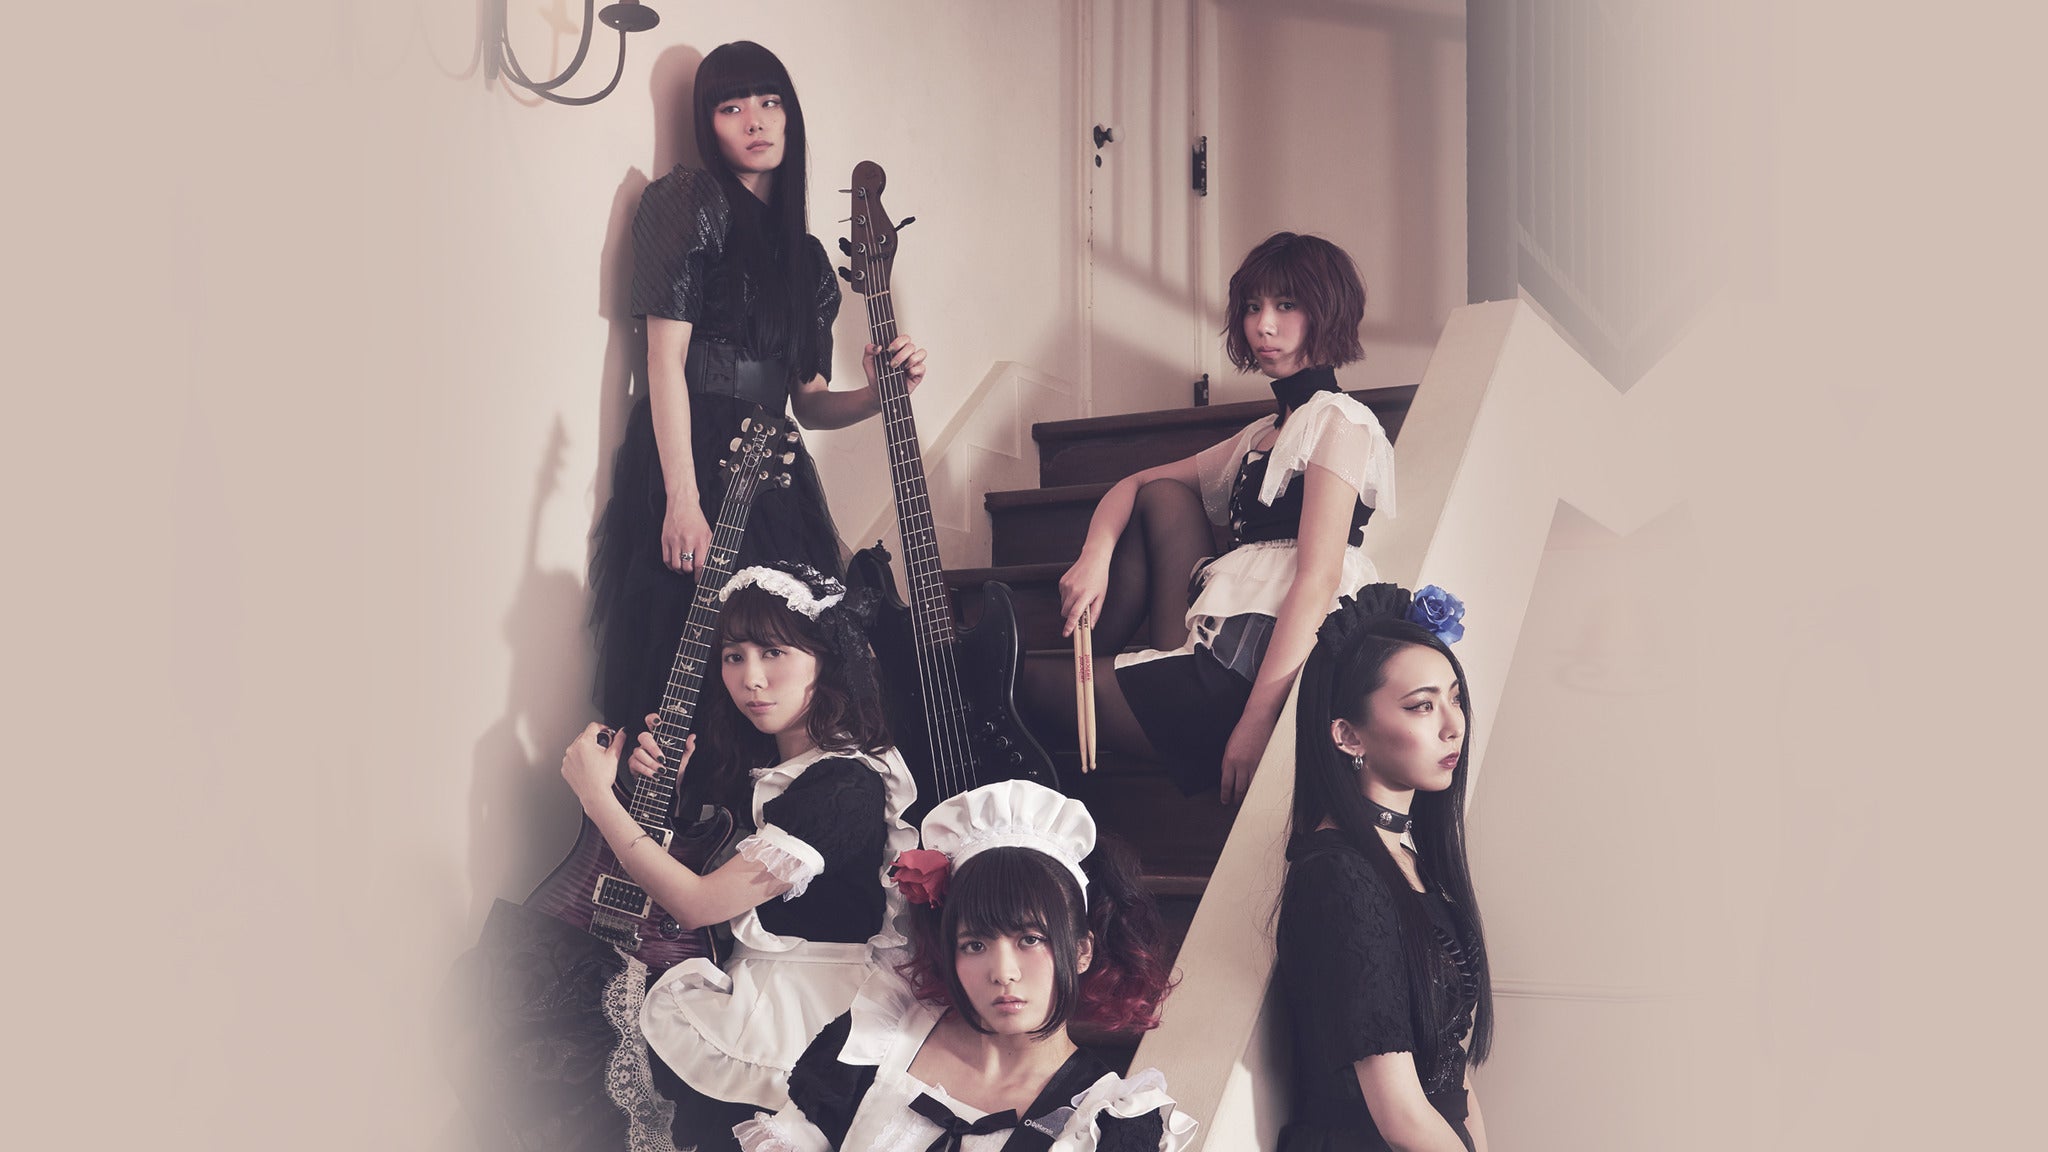 BAND-MAID WORLD DOMINATION TOUR 2019 ~gekidou~ in New York promo photo for Live Nation Mobile App presale offer code